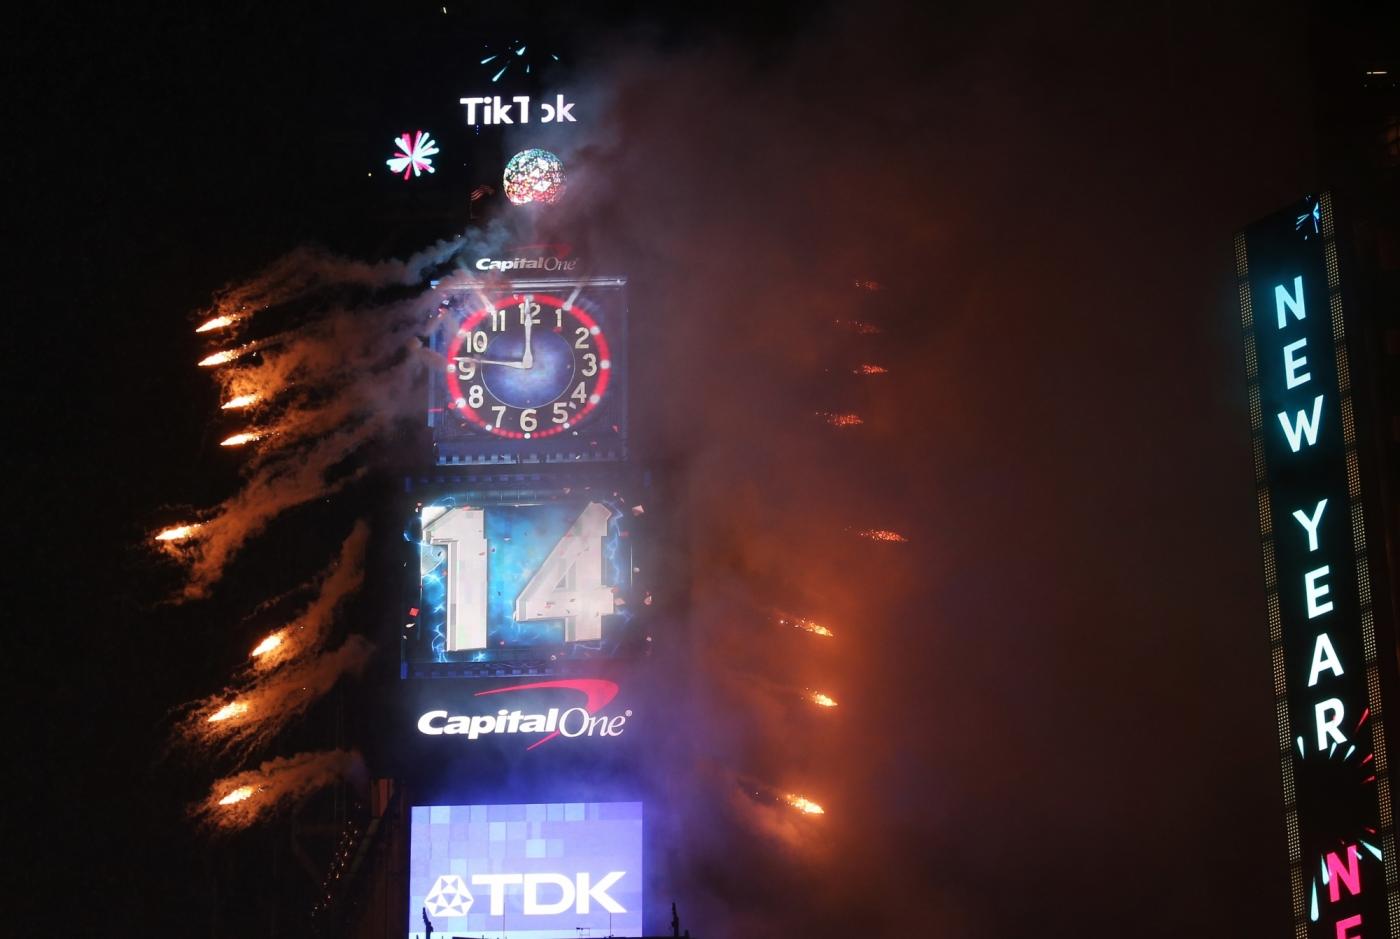 NEW YORK, Jan. 1, 2019 (Xinhua) -- Fireworks go off during the annual New Year's Eve celebration at Times Square in New York, the United States, on Dec. 31, 2018. (Xinhua/Qin Lang/IANS) by .